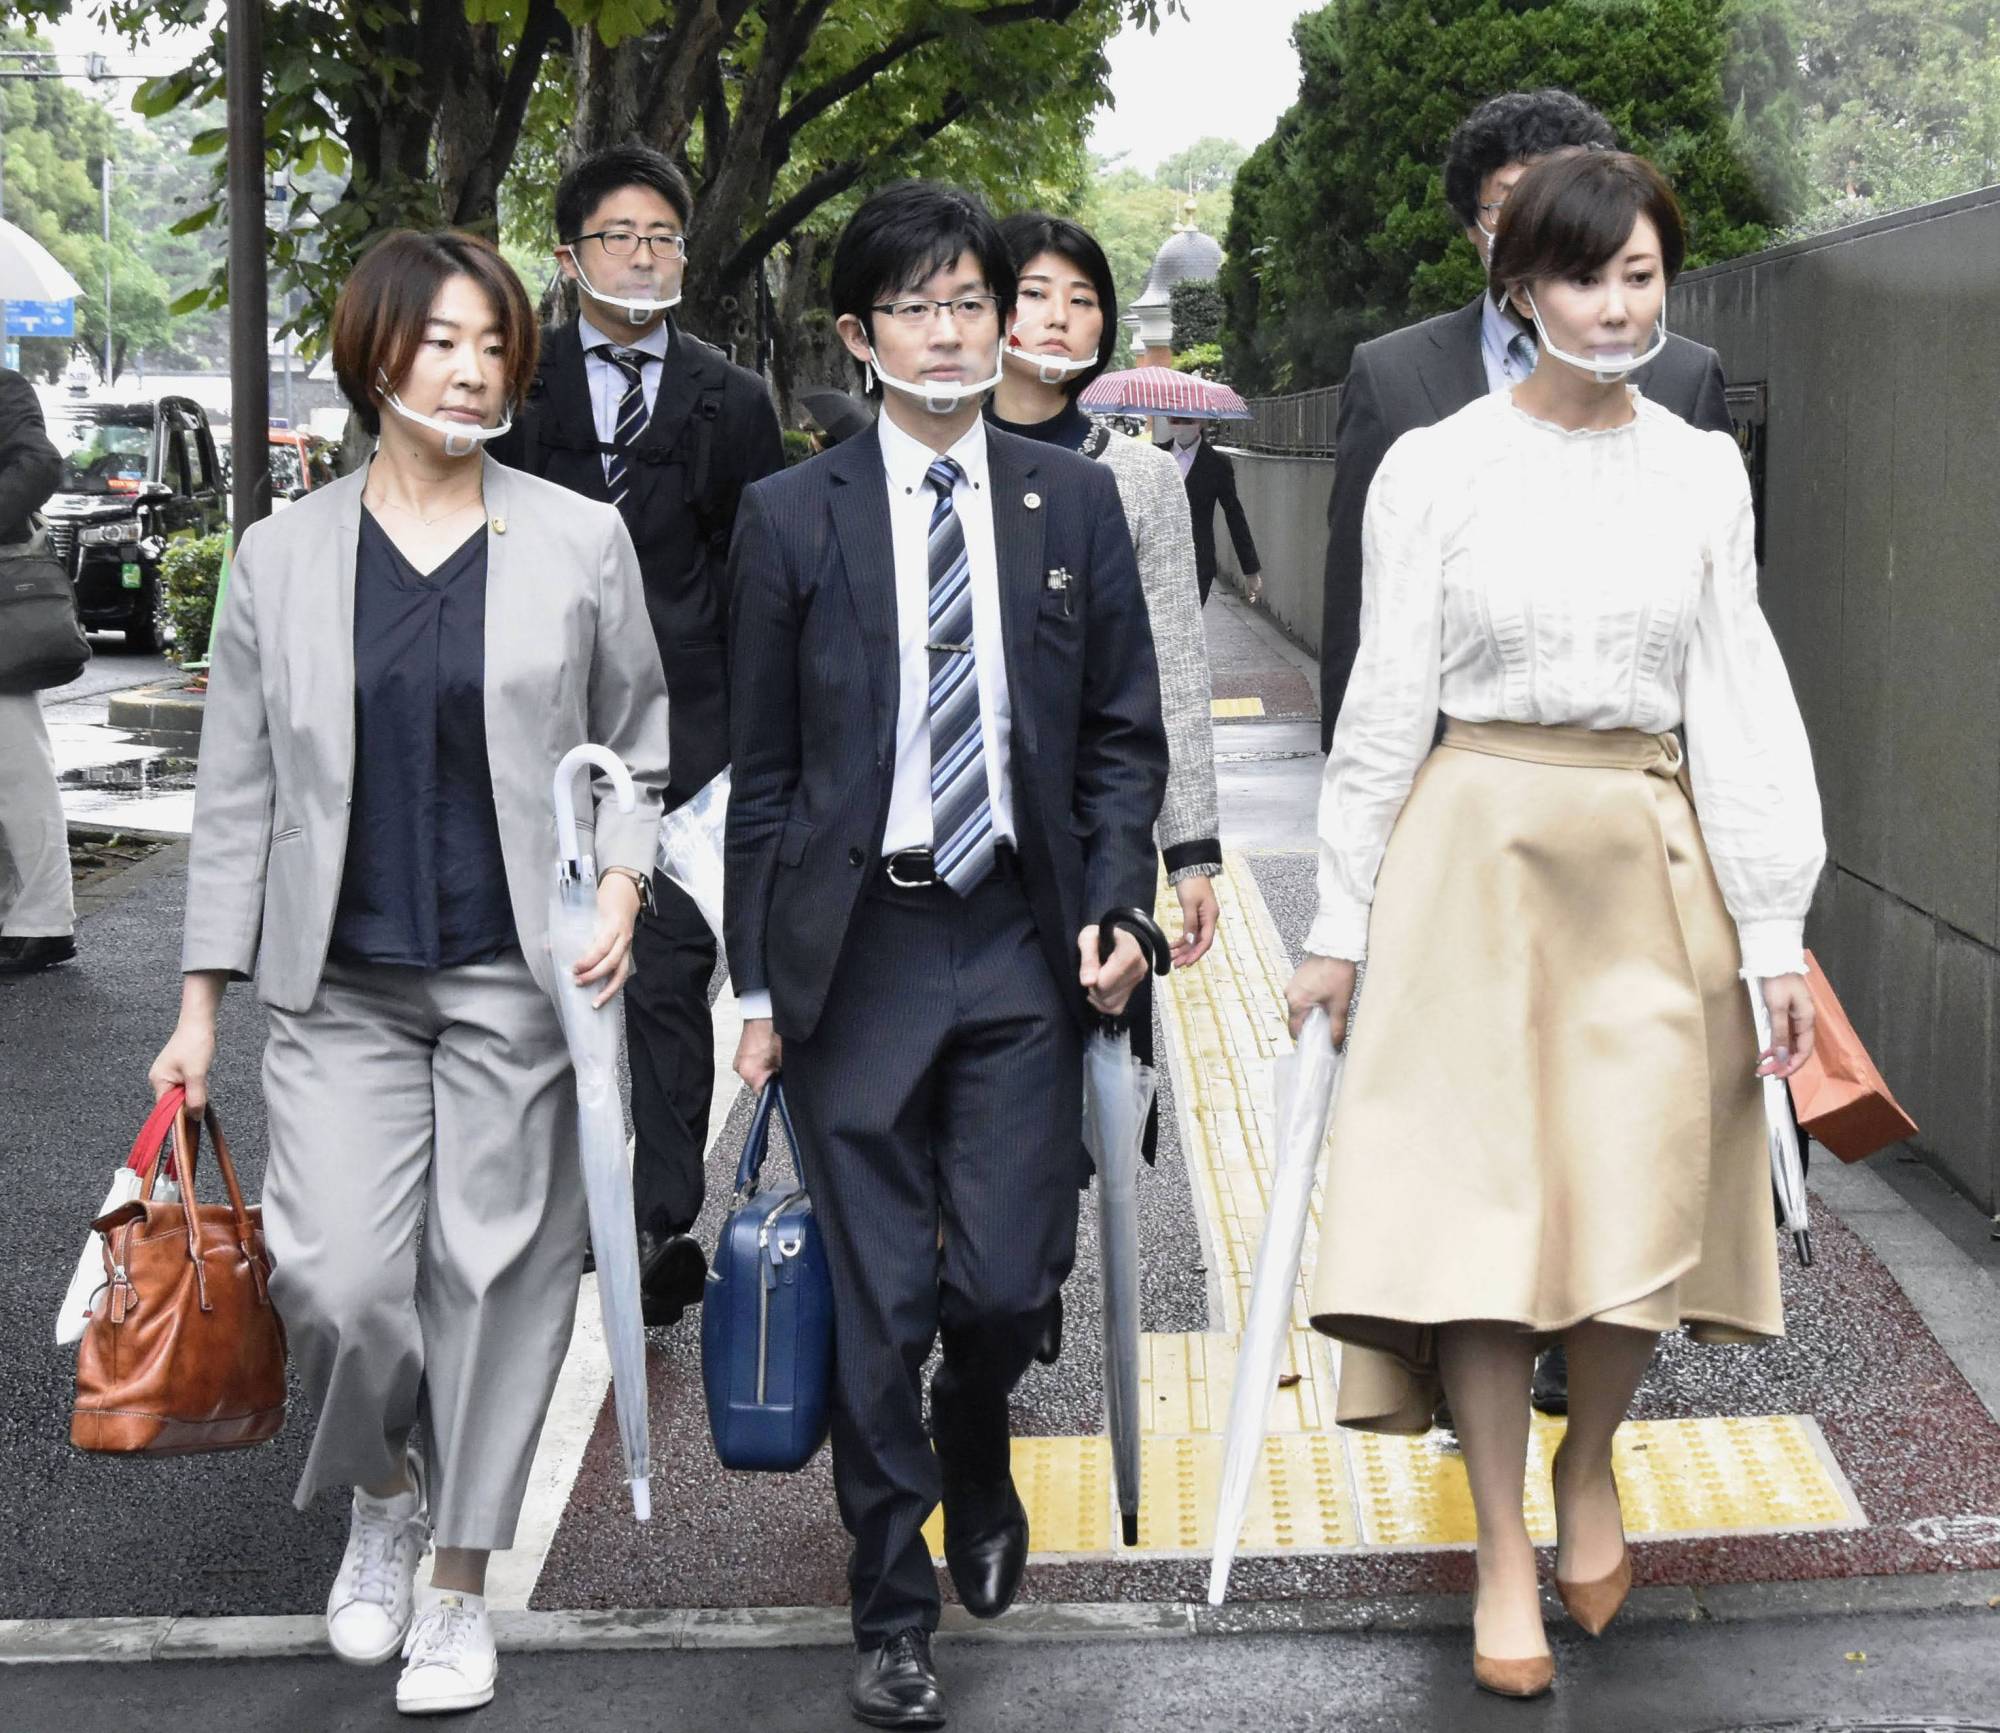 Shocking discrimination Japans sex industry cries foul over exclusion from government pic picture picture